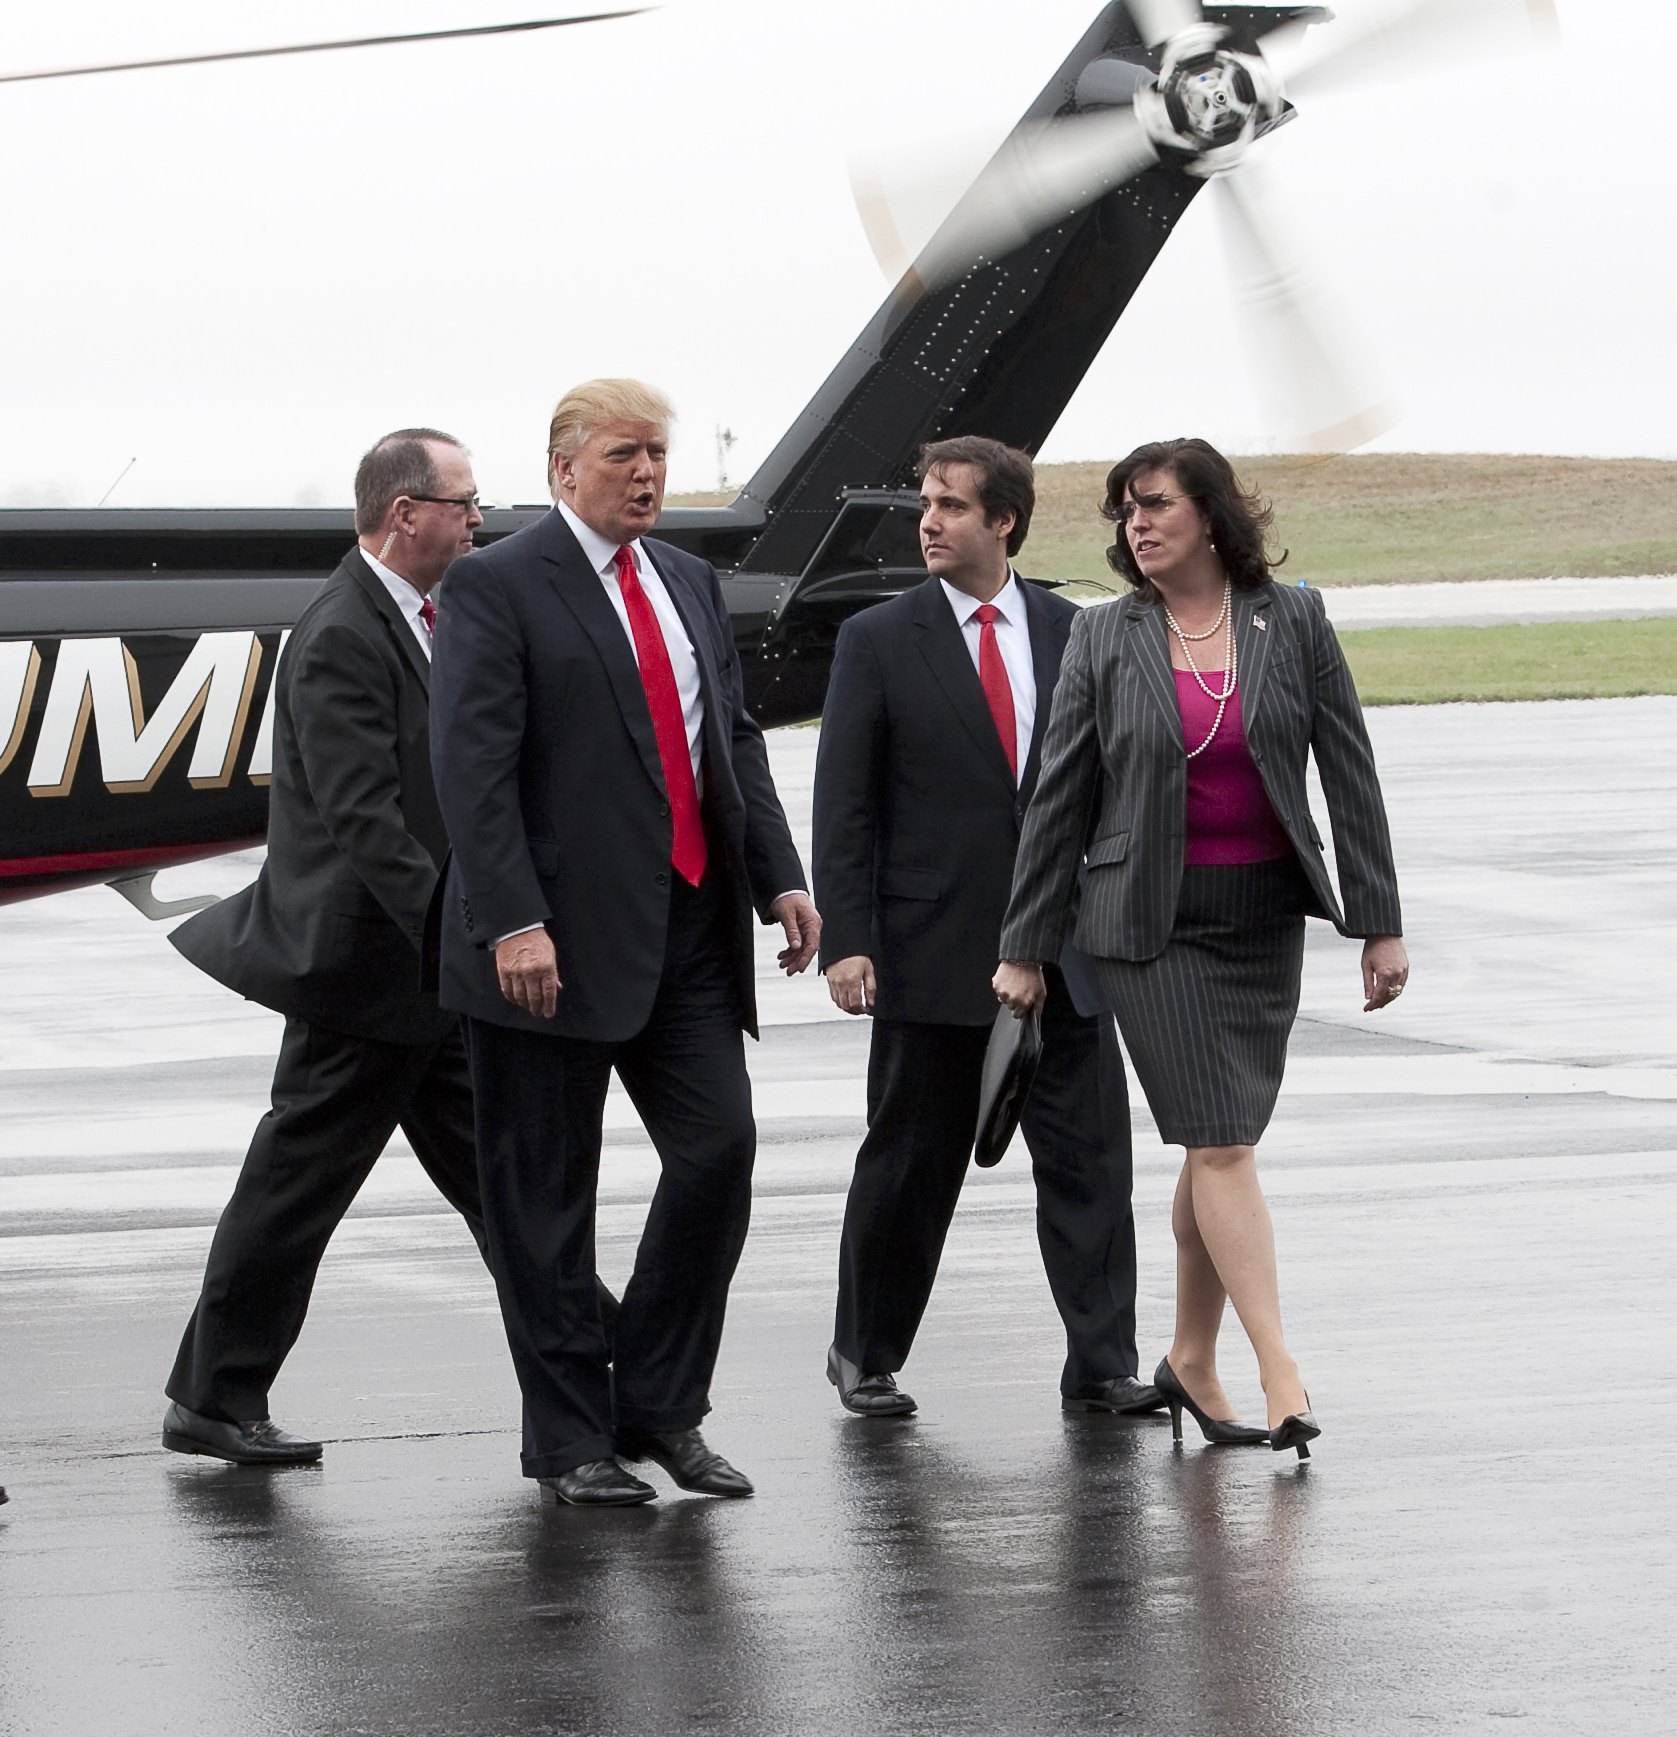 PHOTO: Donald Trump arrives in Portsmouth, New Hampshire, alongside his legal team, April 27, 2011.